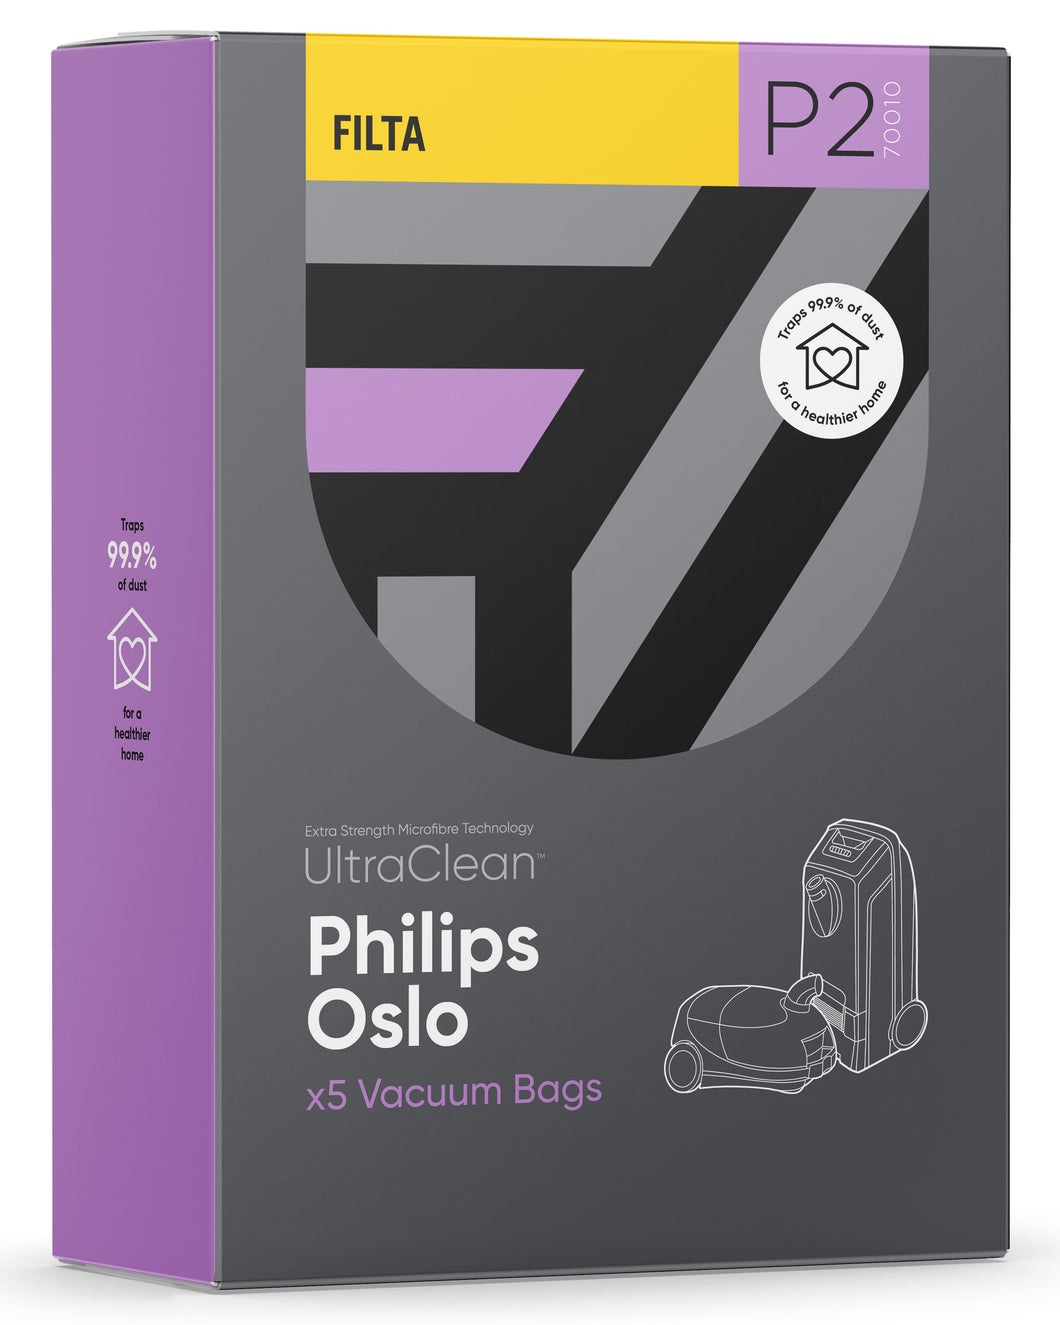 P2 - ULTRACLEAN PHILIPS OSLO SMS MULTI LAYERED VACUUM BAGS 5 PACK